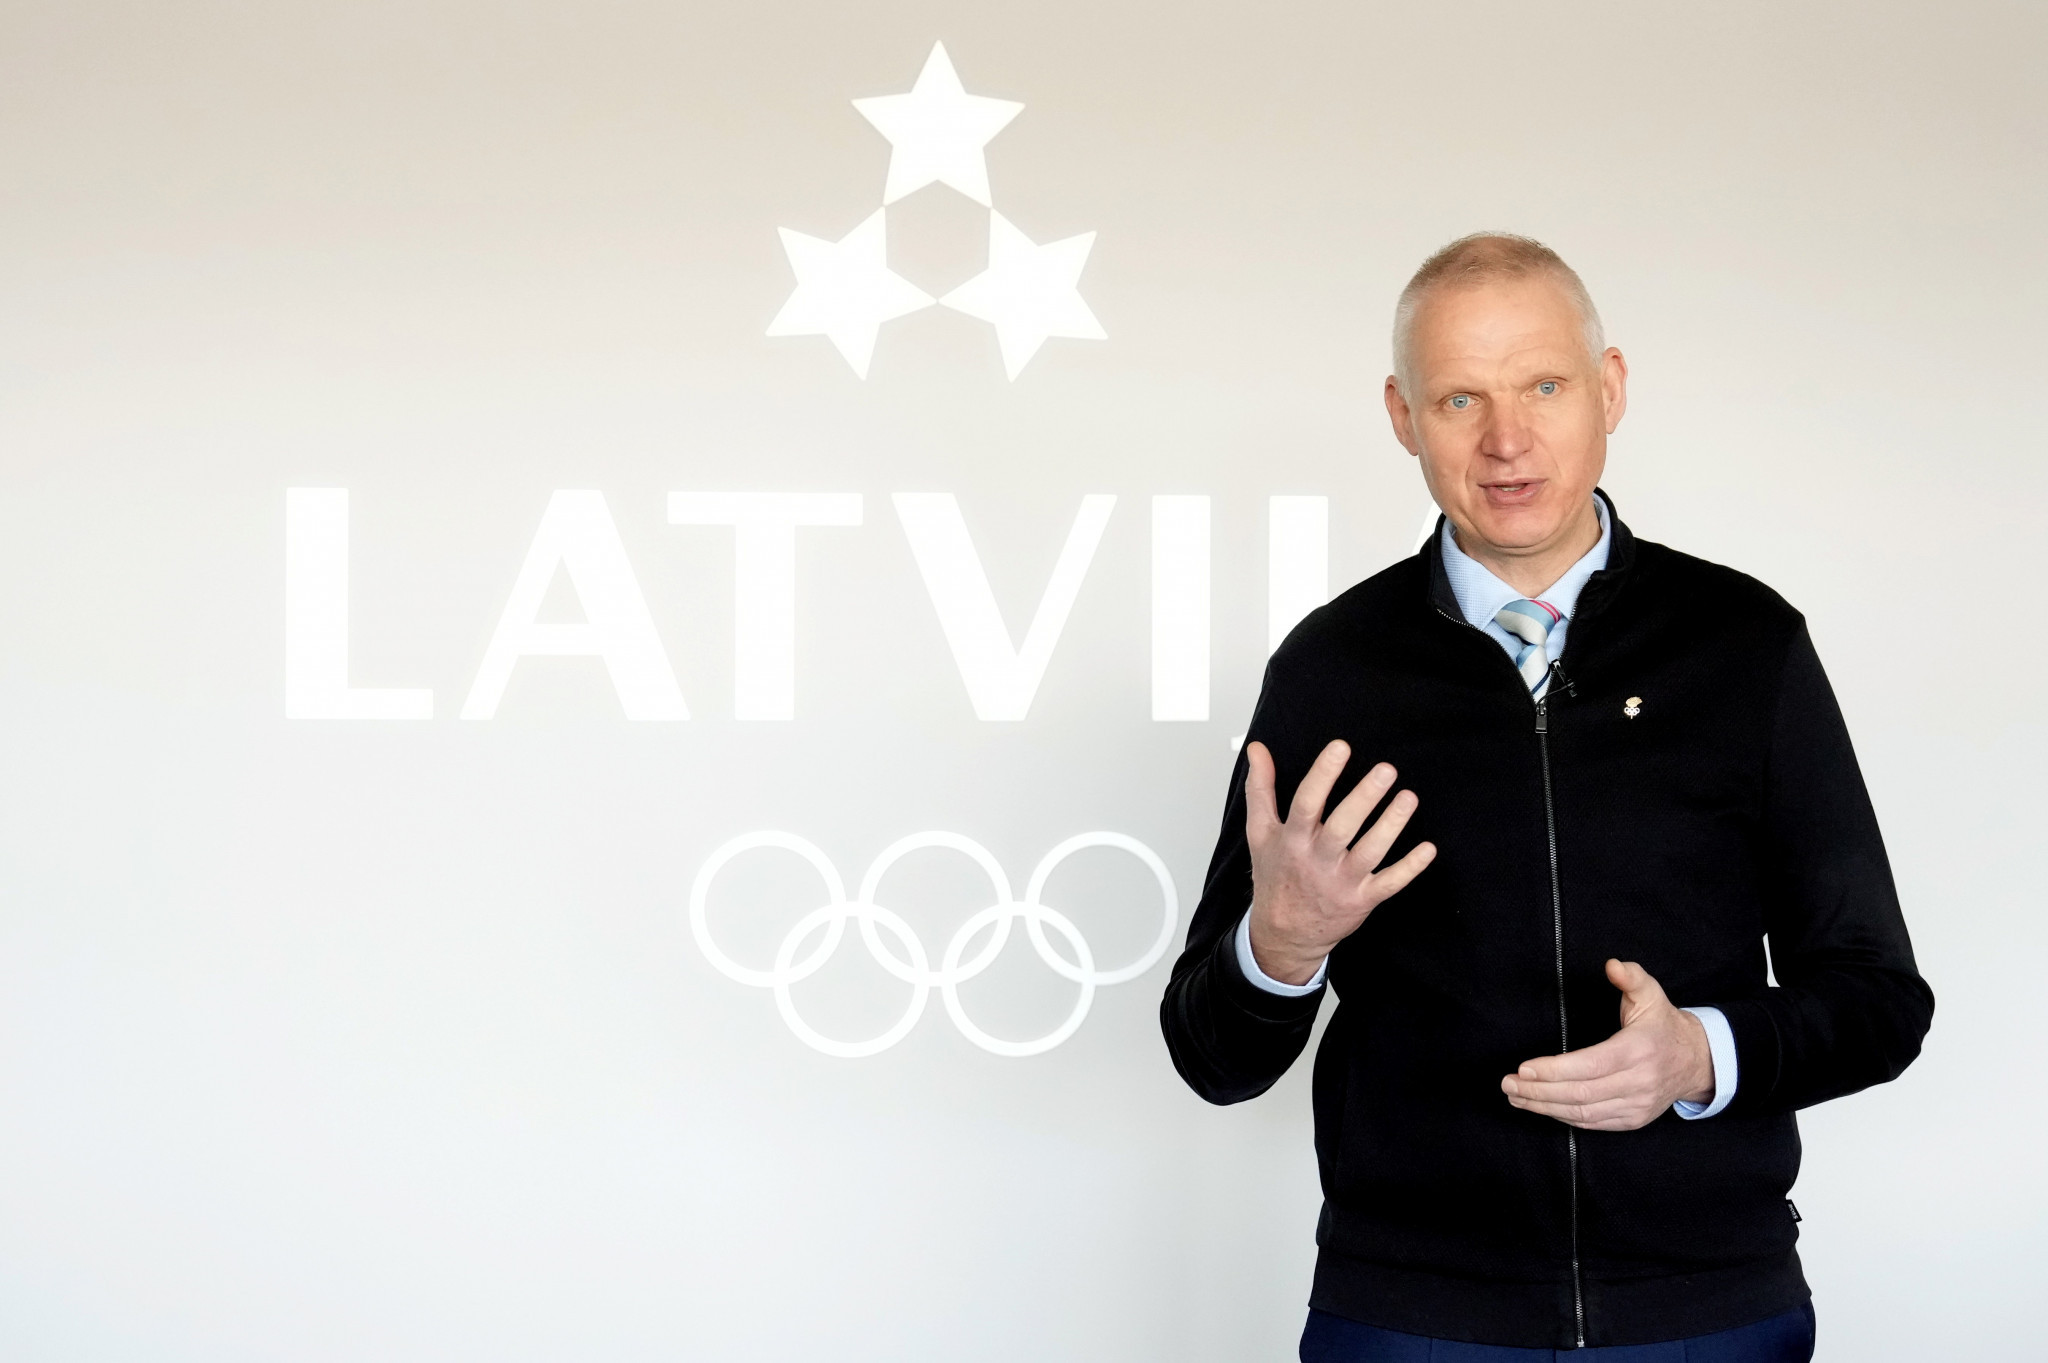 Latvian Olympic Committee President Žoržs Tikmers insisted he has "not committed any violations using my influence" after he was accused of conflicts of interest ©LOK